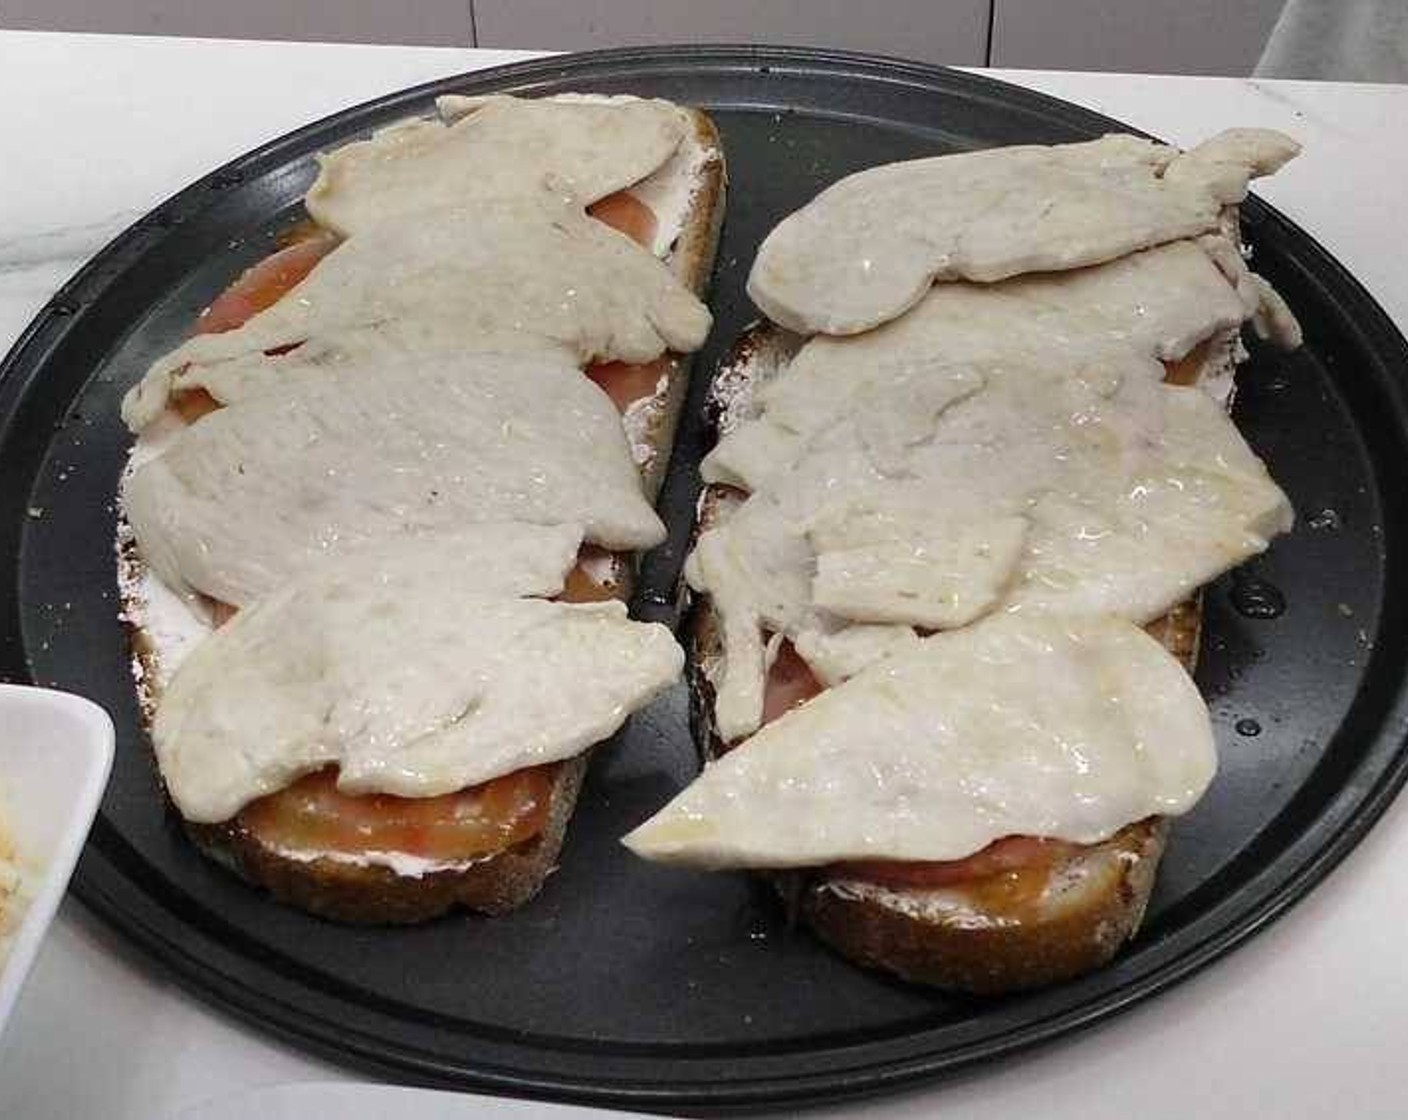 step 3 Spread Philadelphia Original Soft Cheese (to taste) on the Bread (to taste) slices. Add Tomatoes (2) and the chicken fillets to each sandwich.